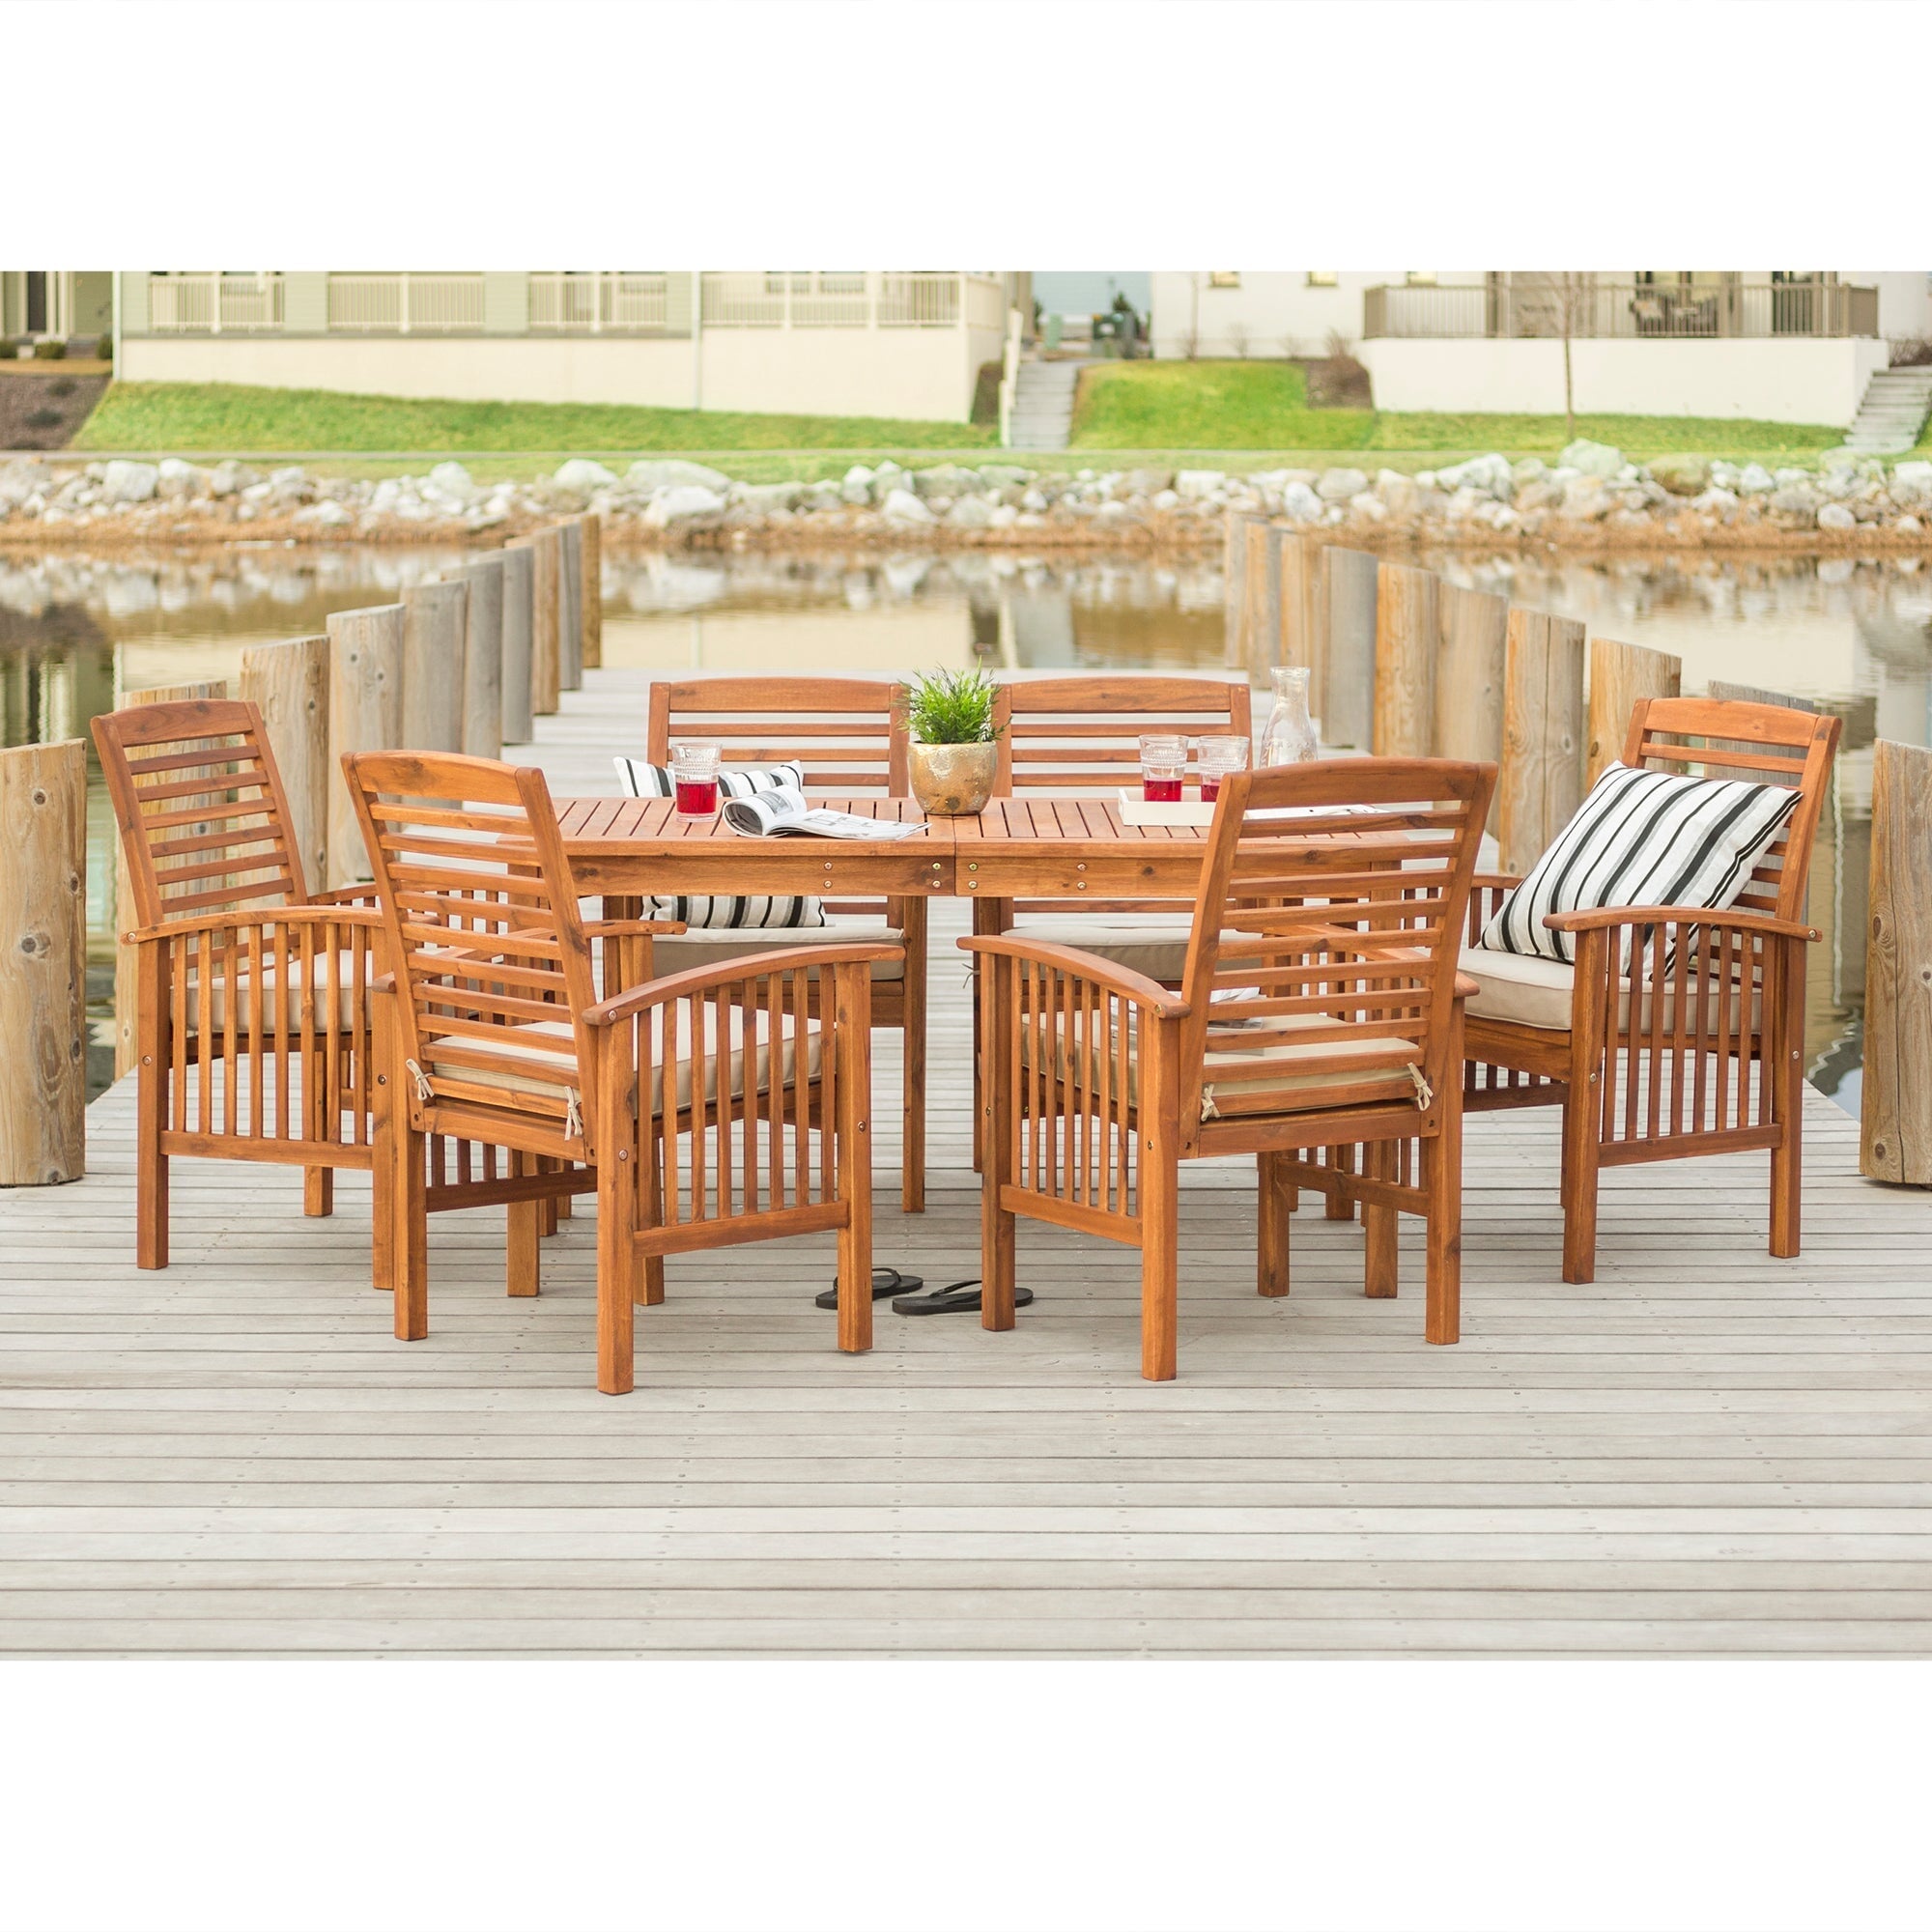 Walker Edison Midland 7-Piece Outdoor Patio Dining Set with Cushions